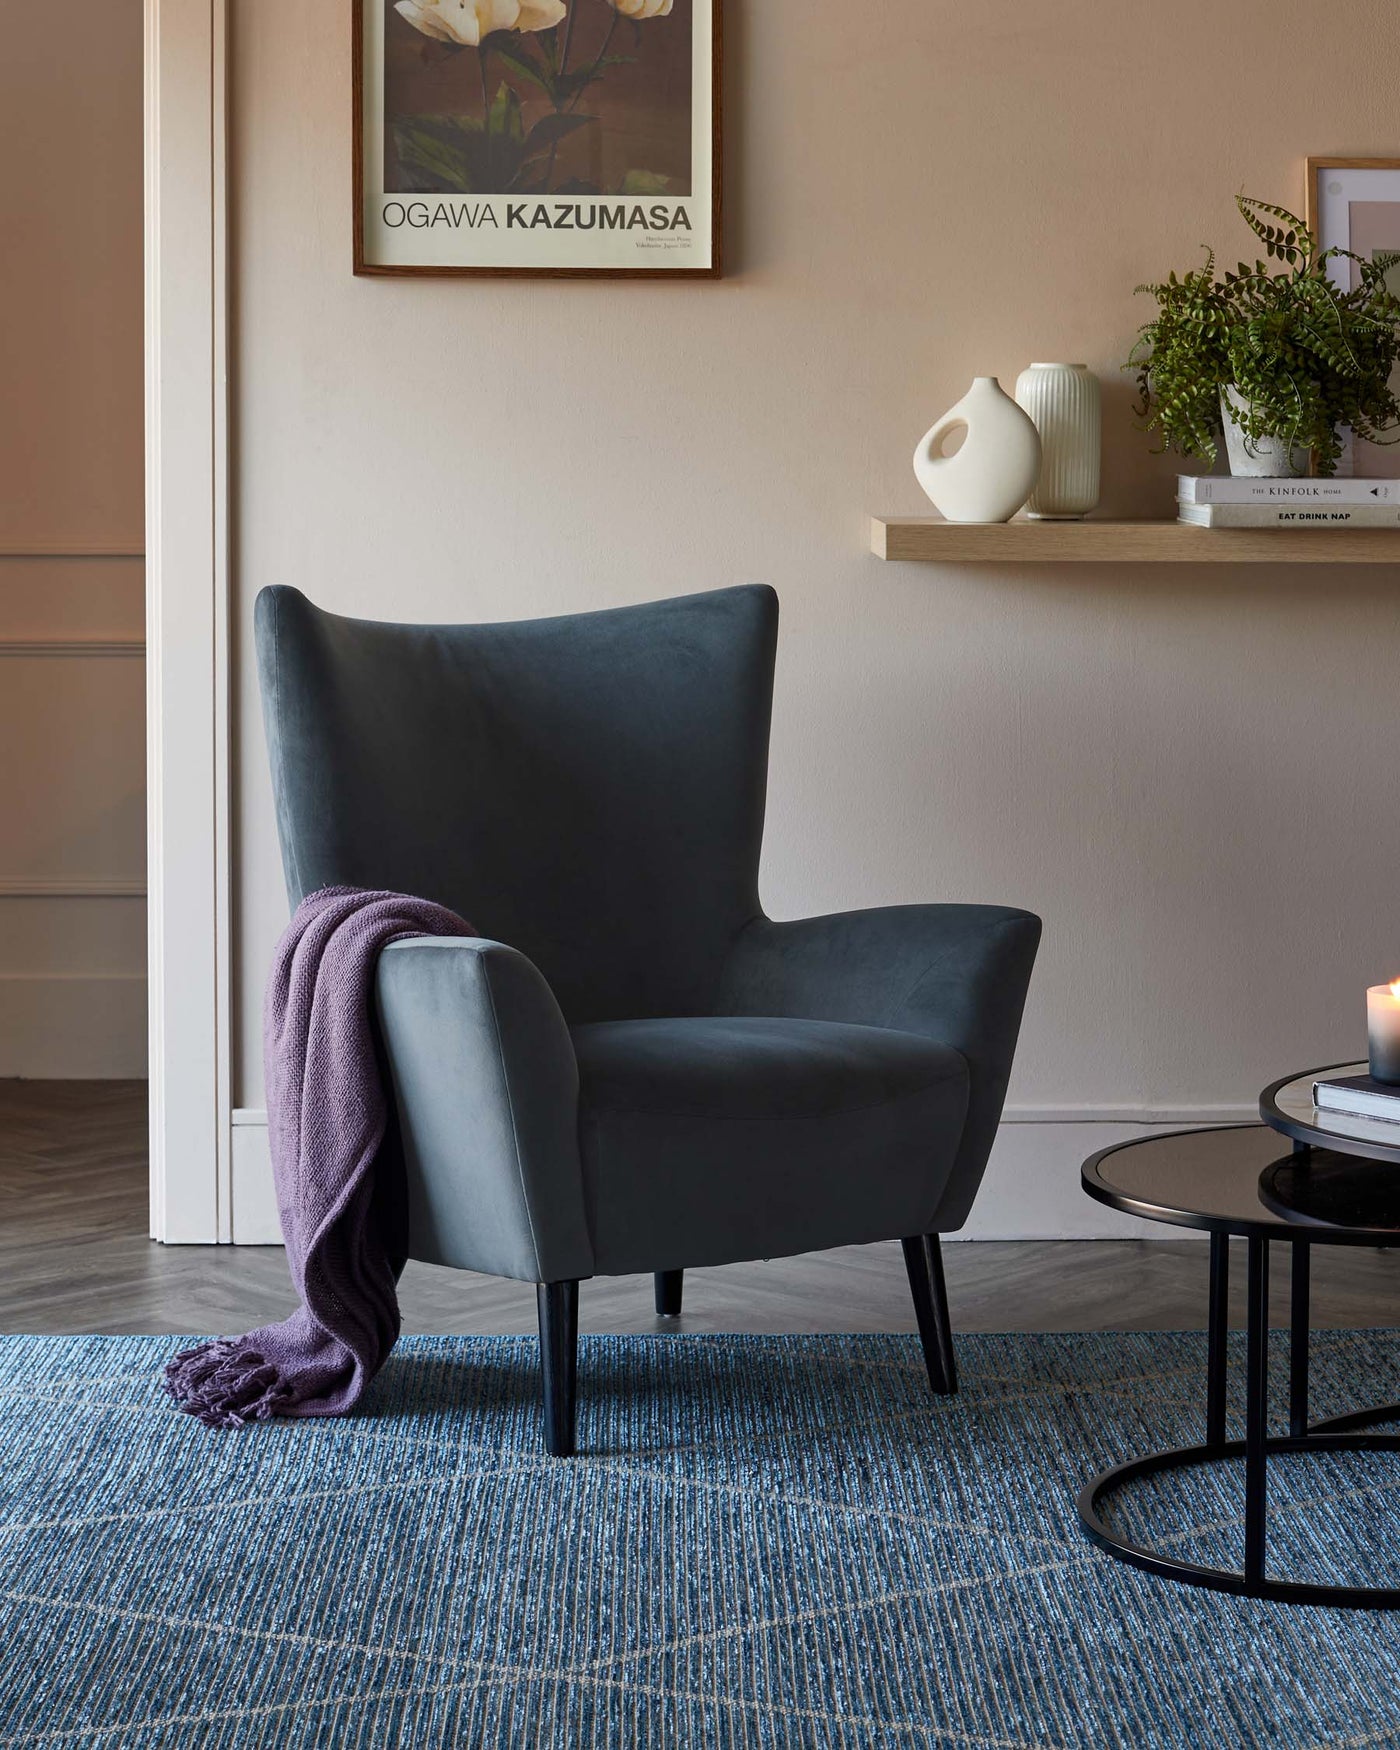 Elegant modern wingback chair in dark grey upholstery with a draped purple throw blanket, accompanied by a round black metal side table with a glass top, on a textured blue area rug.